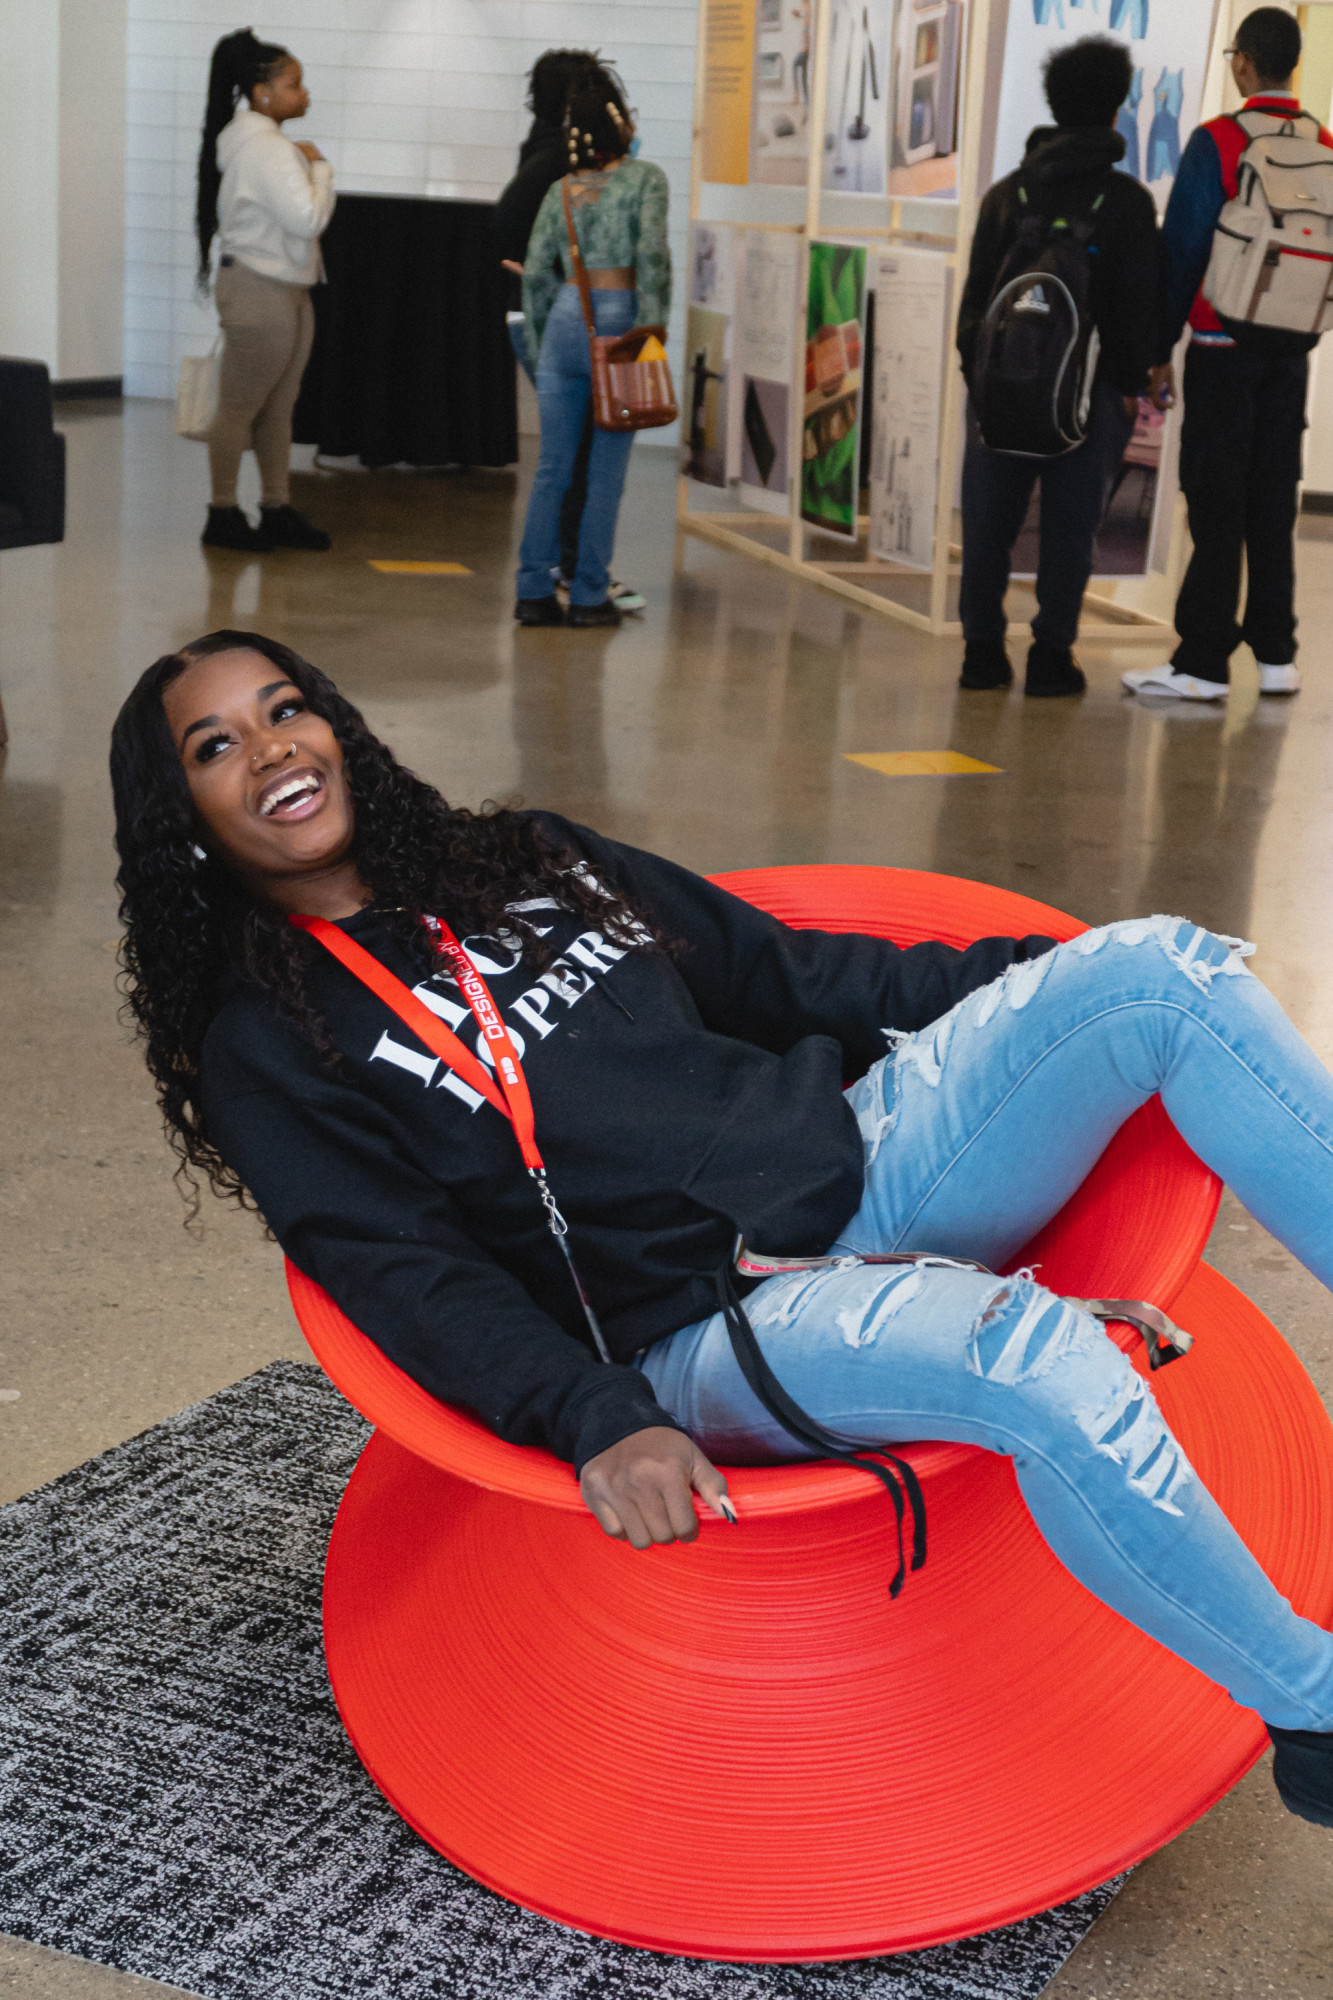 A high school student laughs as she spins in a Herman Miller Spun rotating chair.